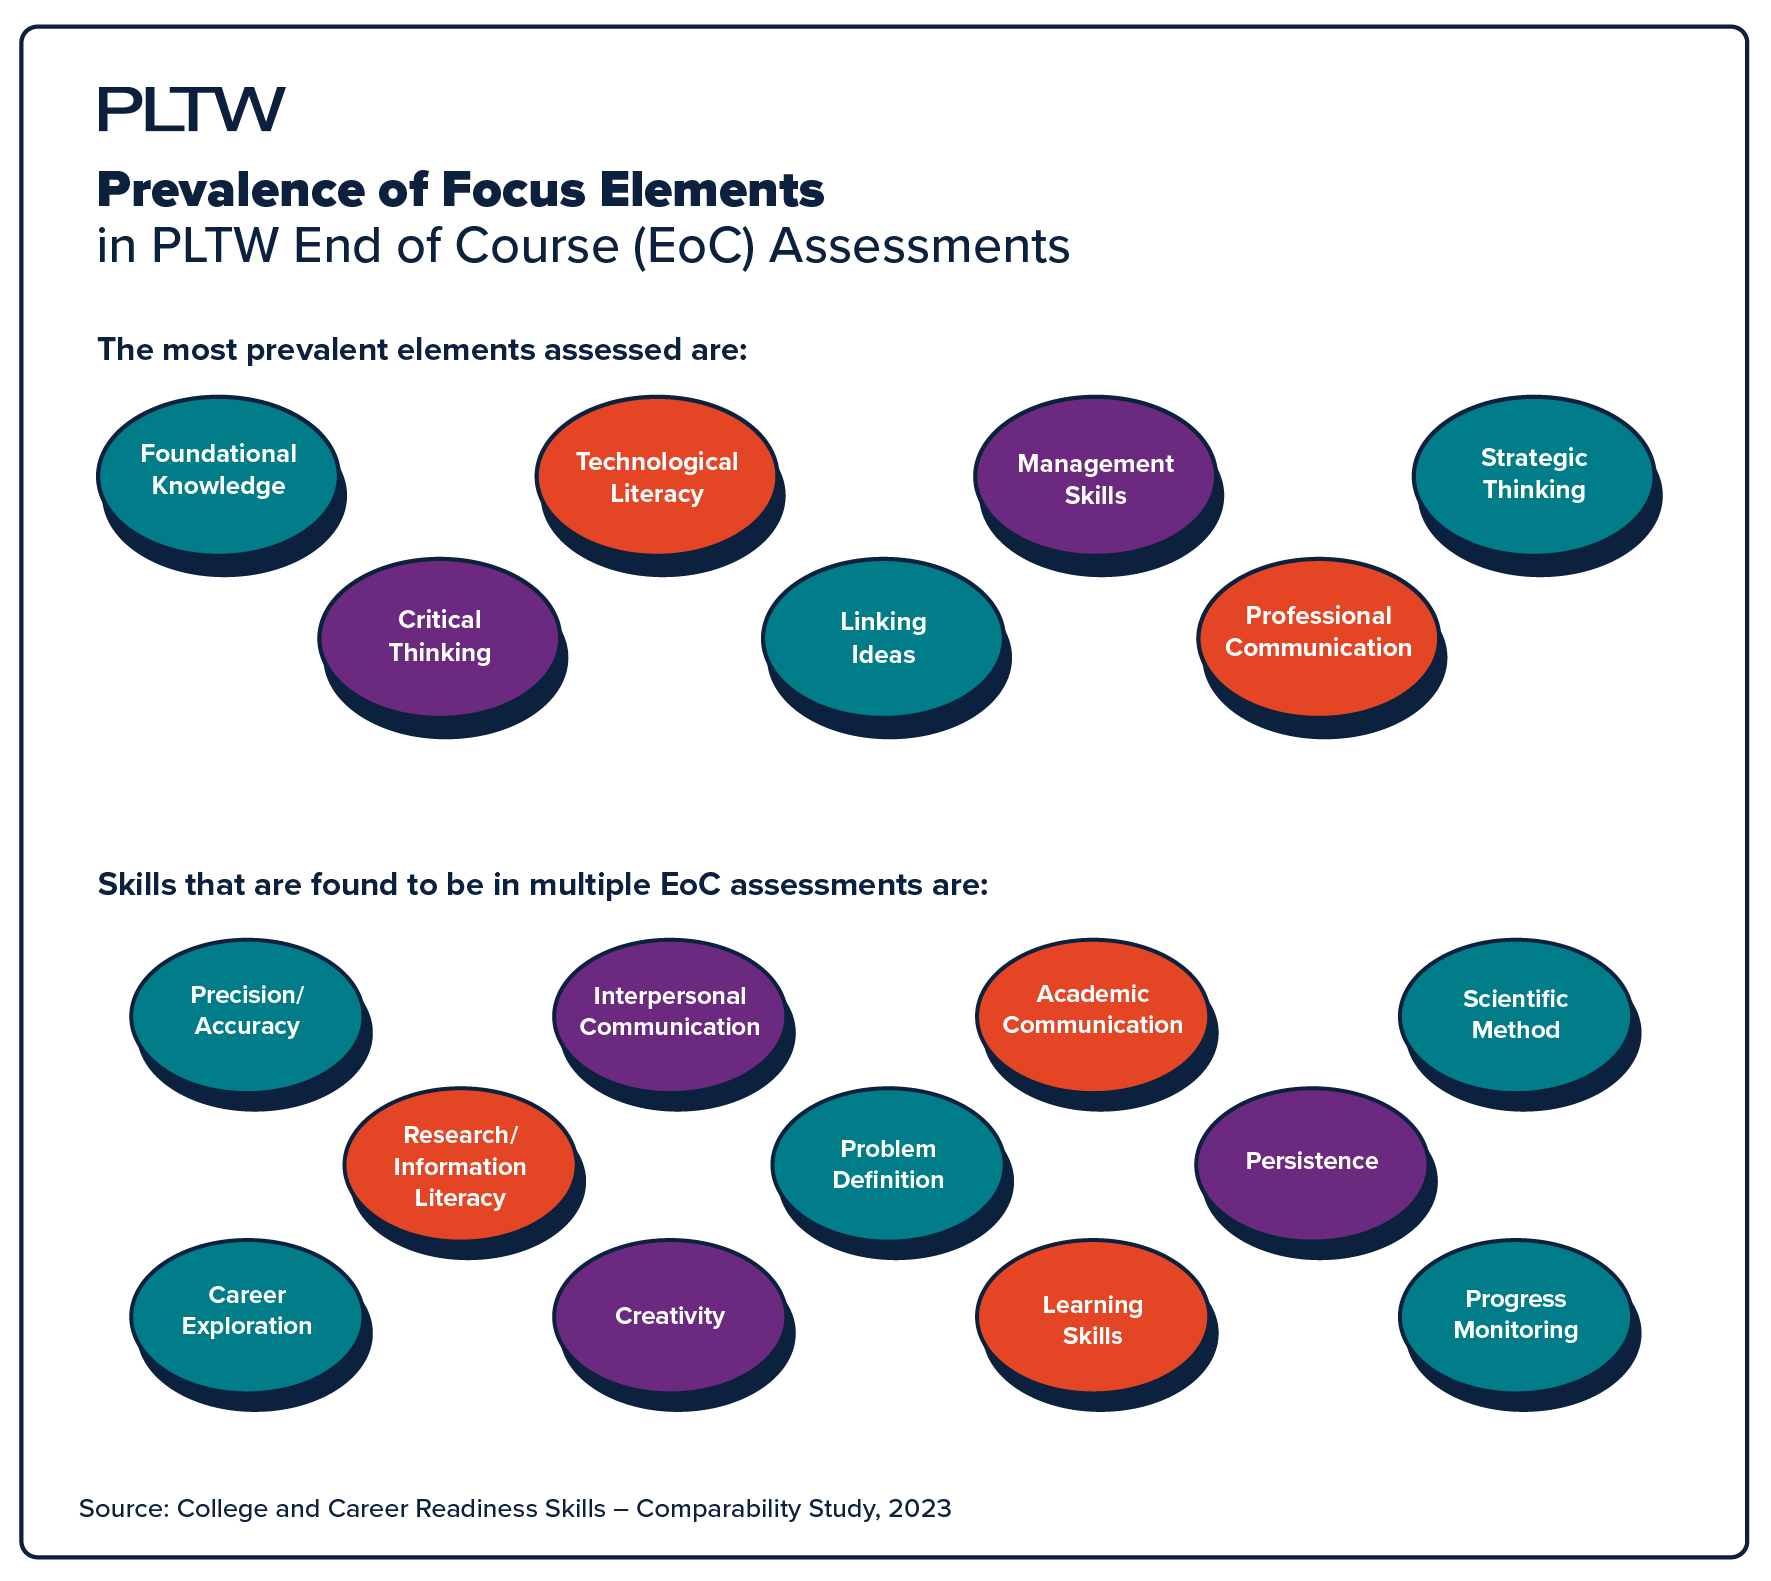 Prevalence of Focus Elements in PLTW End of Course (EoC) Assessments